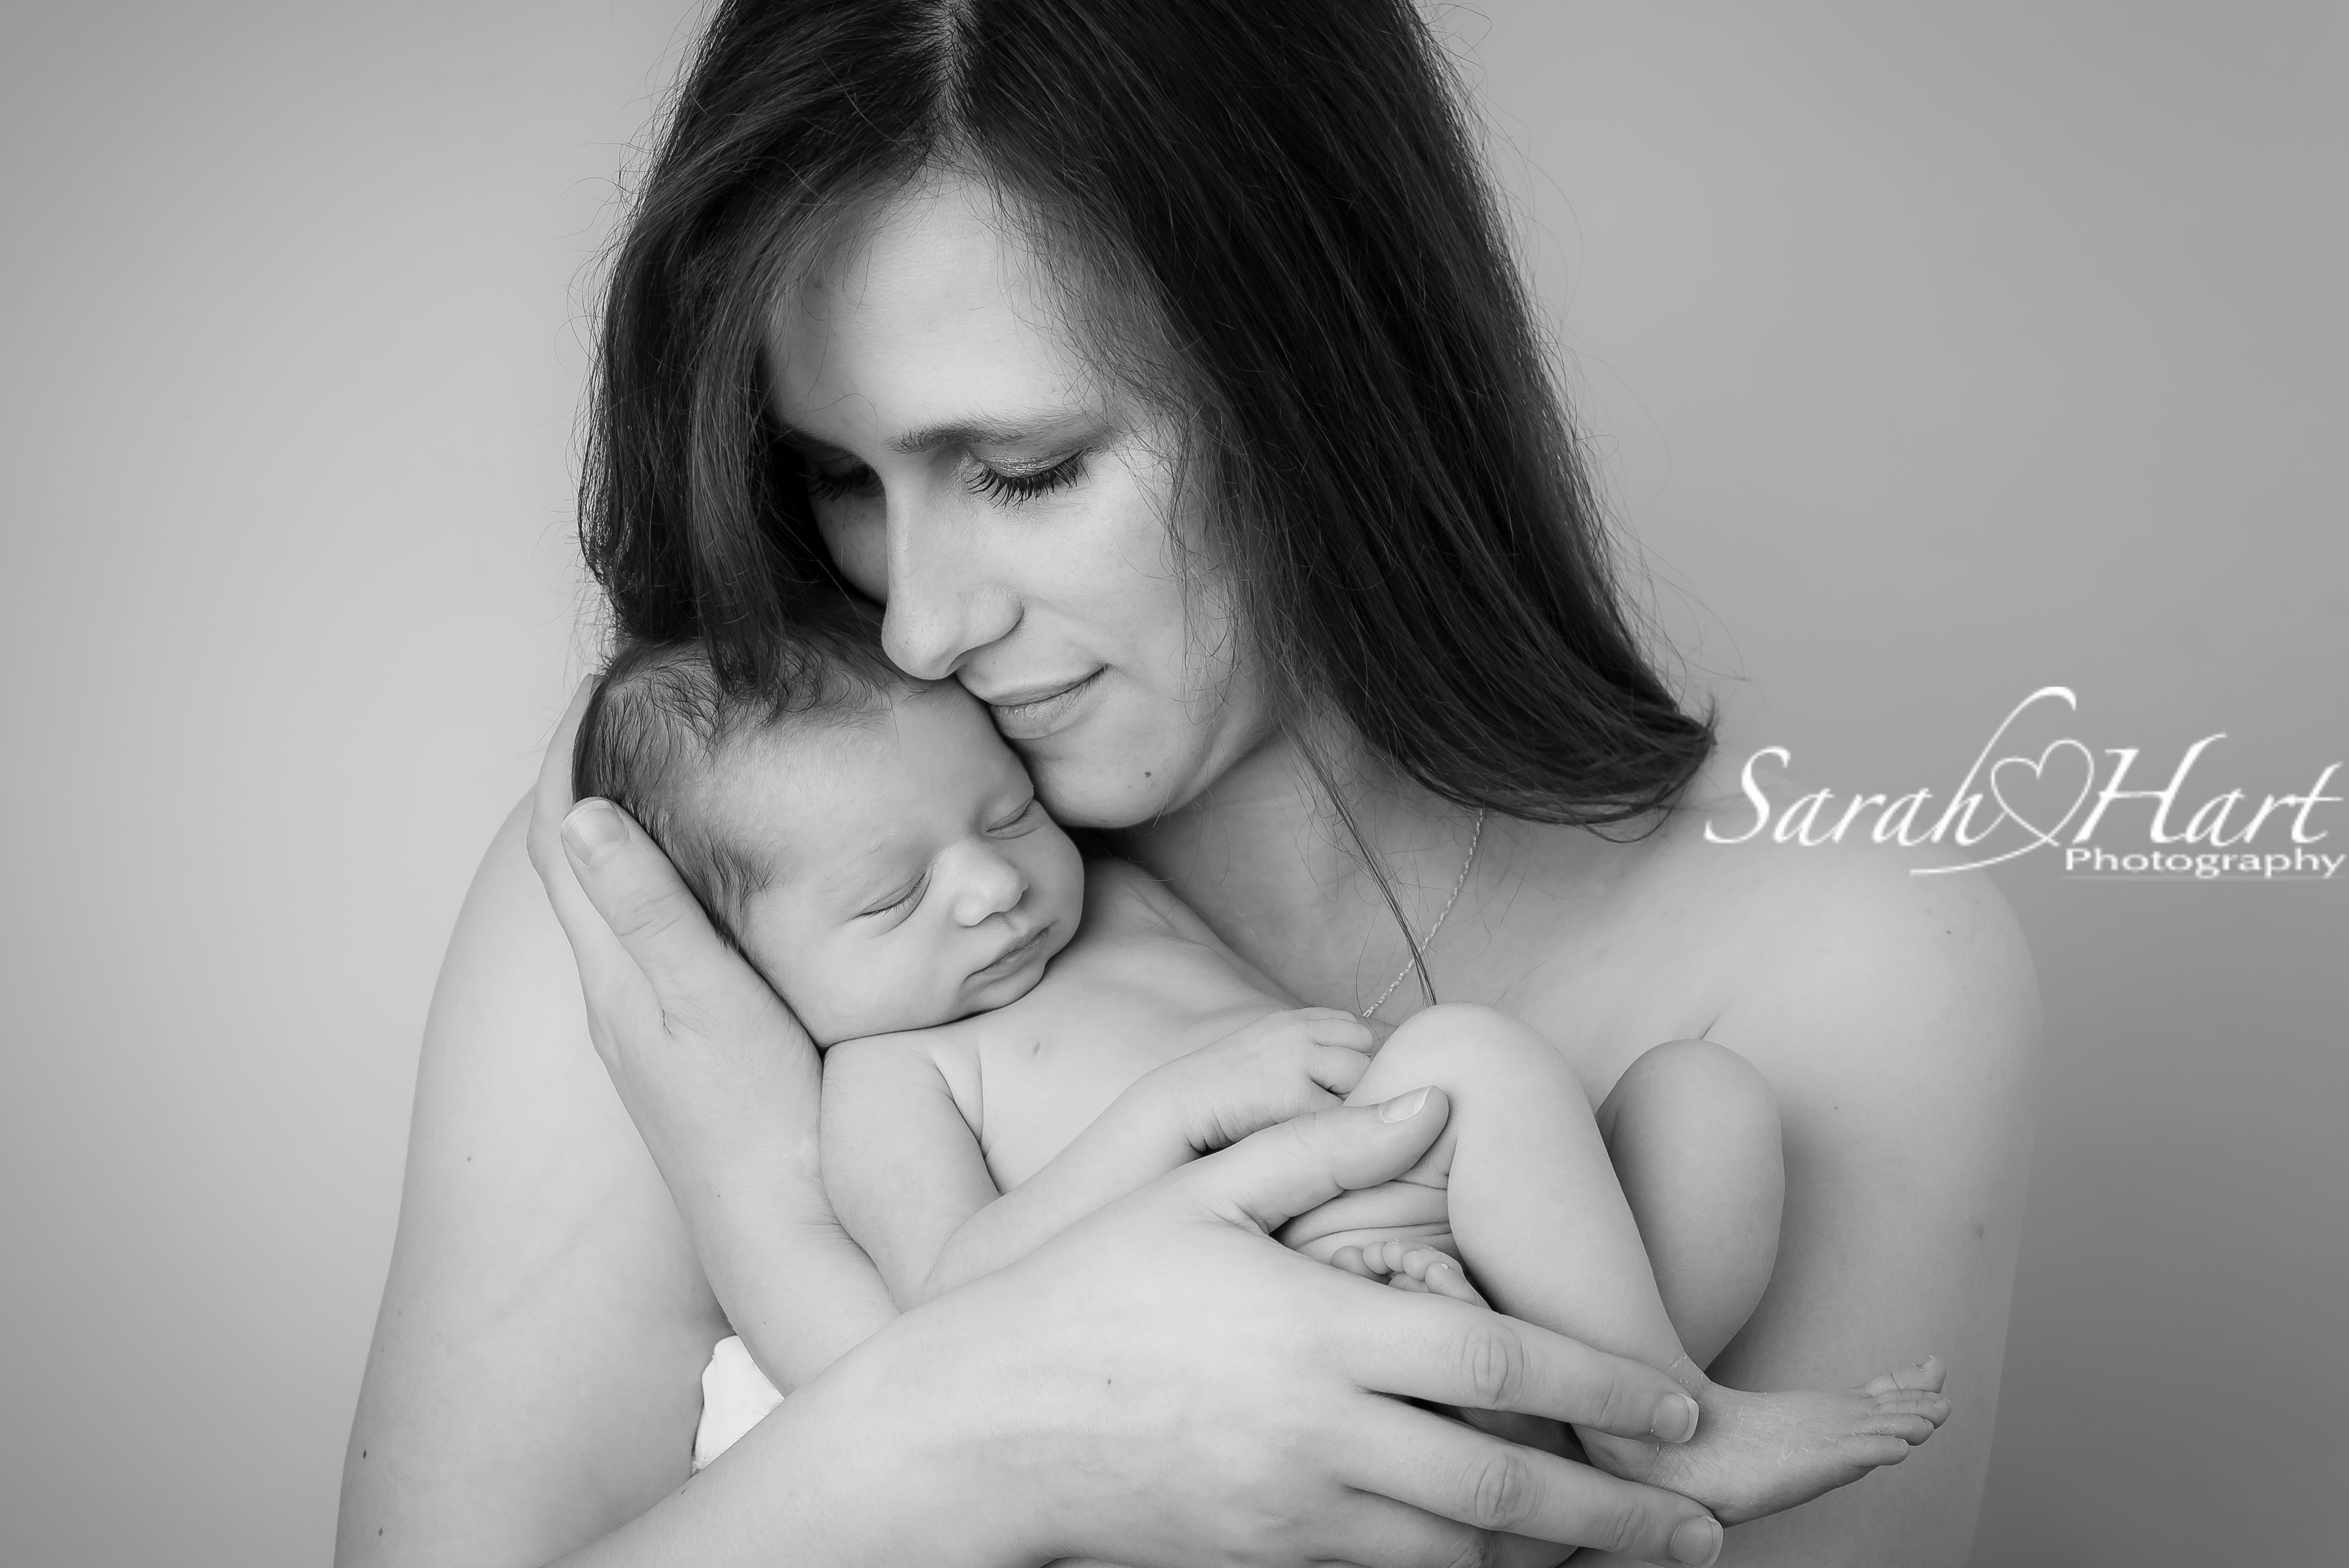 cuddles with mummy, tender moments captured by Sarah Hart